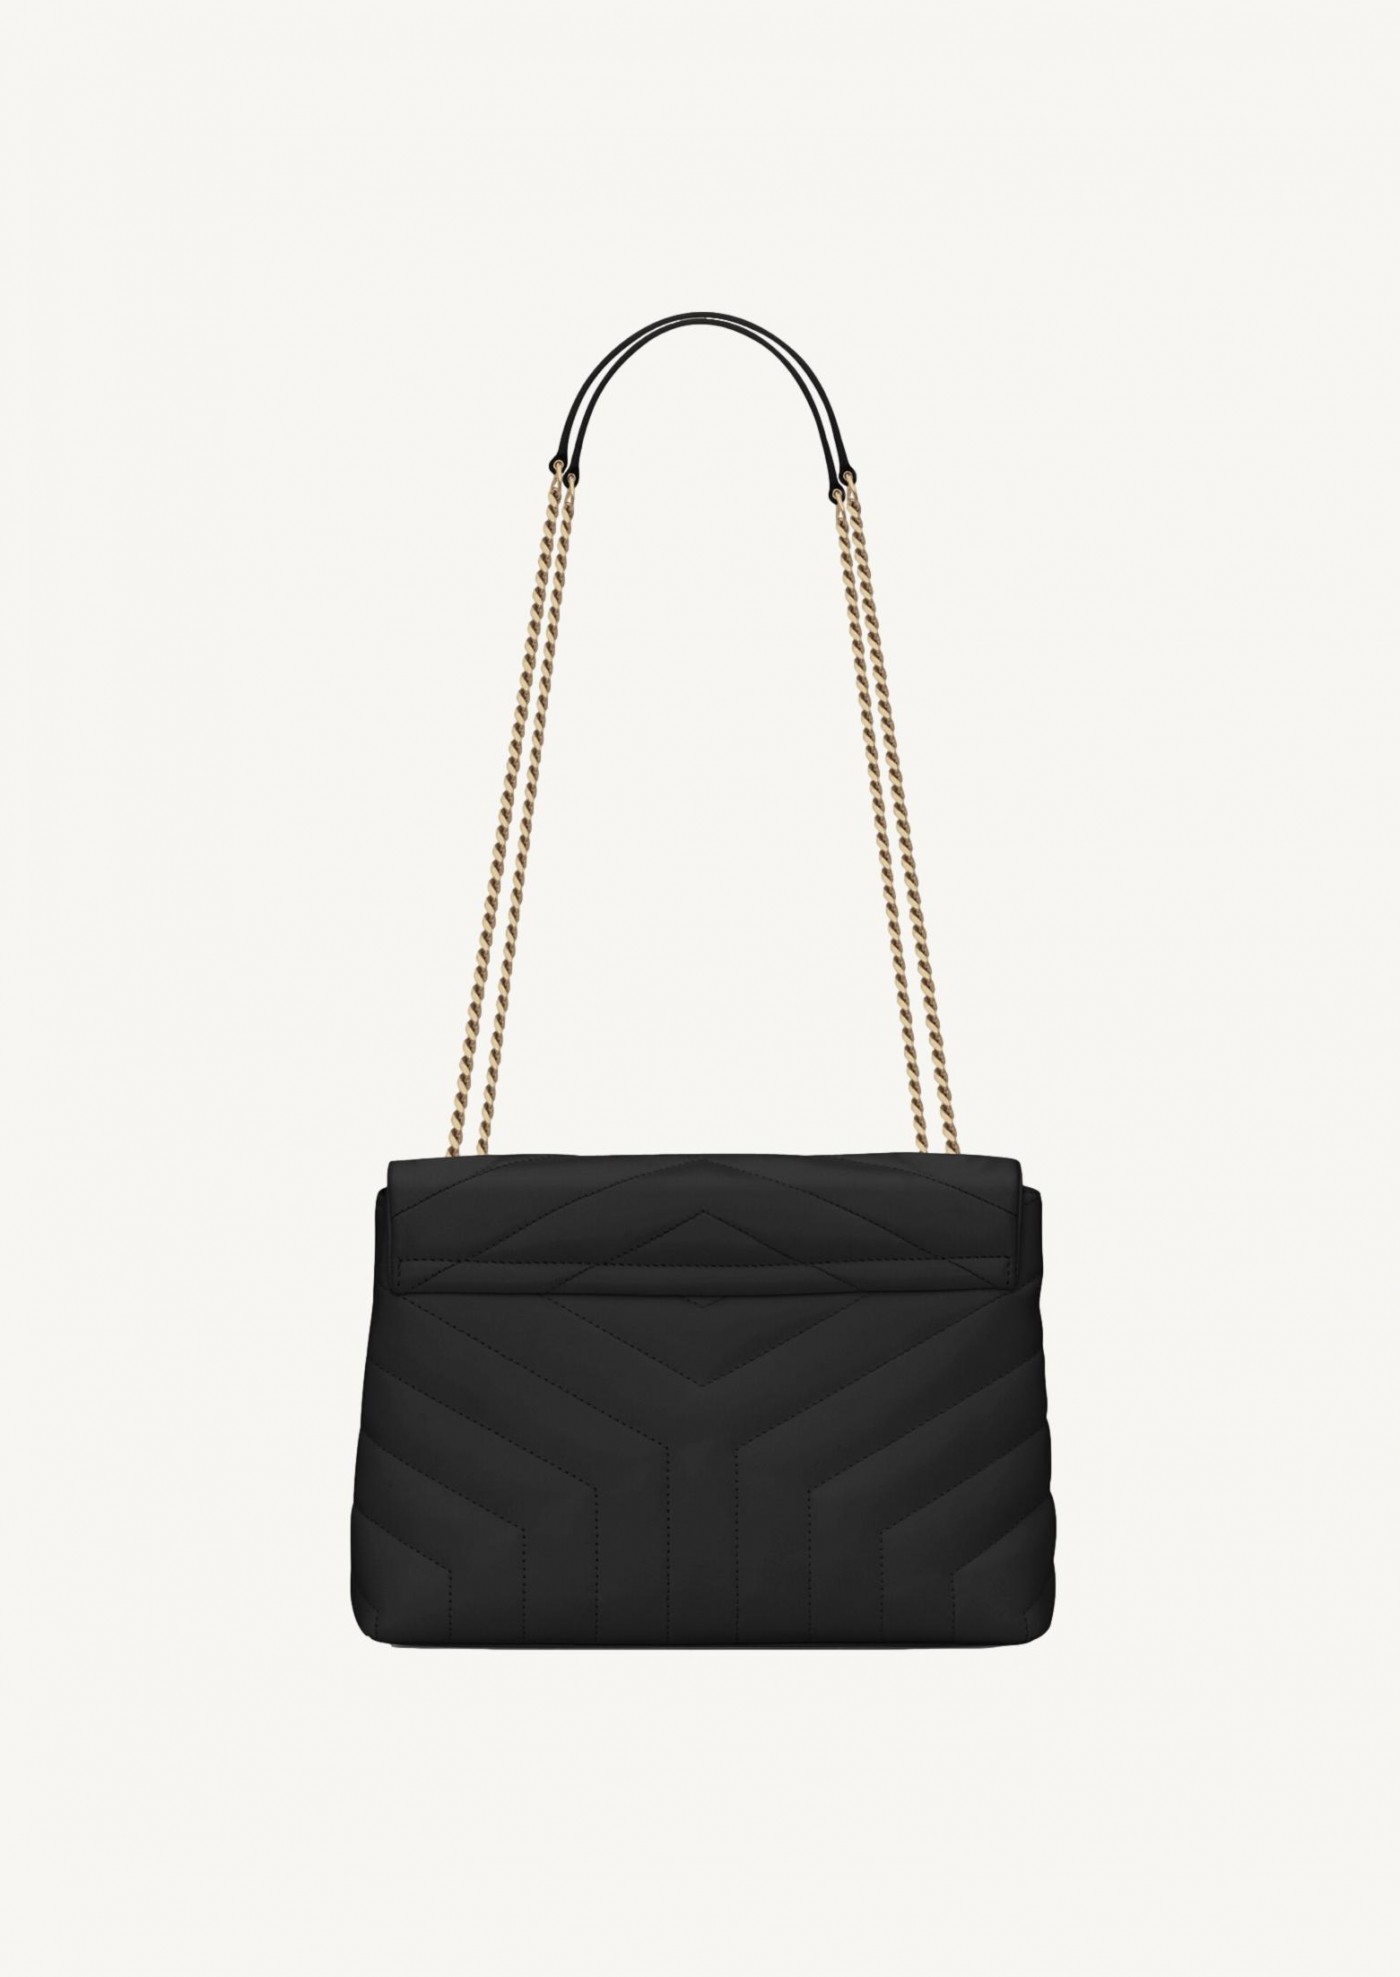 Loulou small in quilted leather black and bold